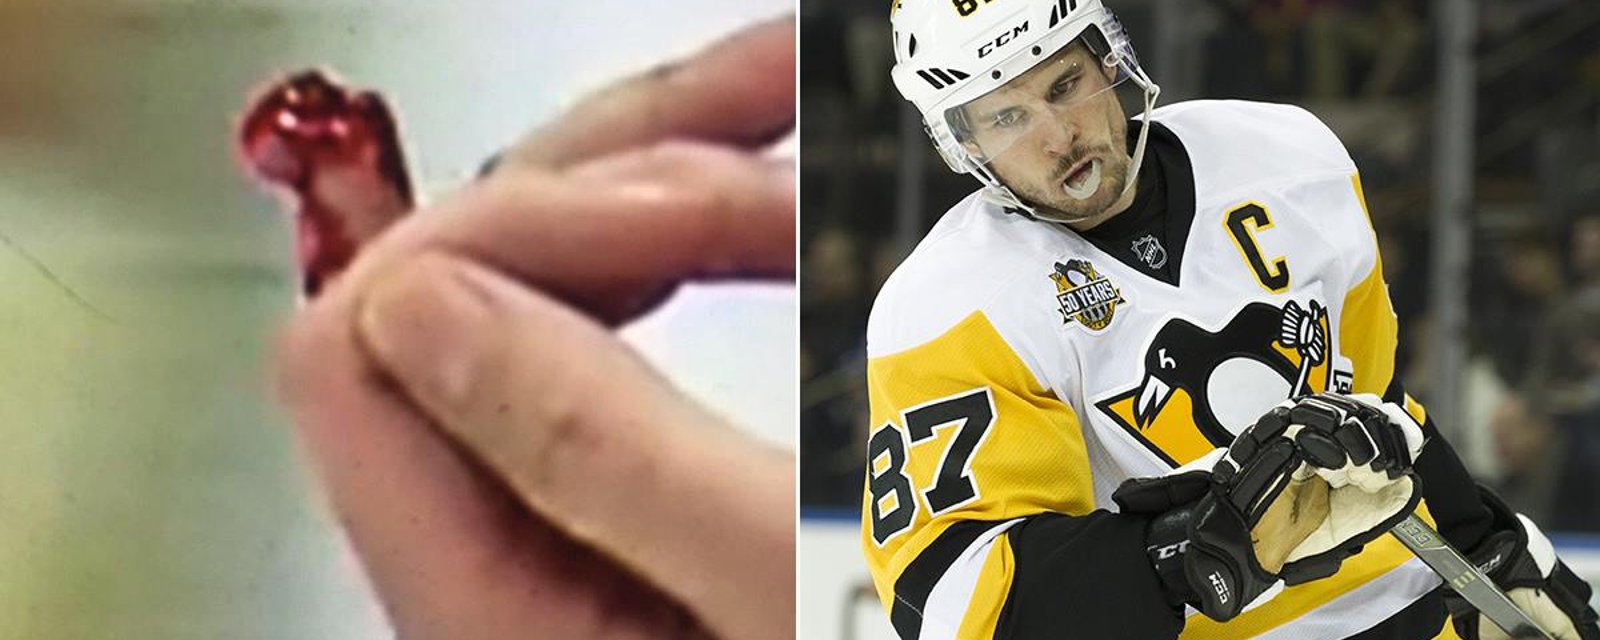 New update on Marc Methot's finger following the Crosby slash are terrible...